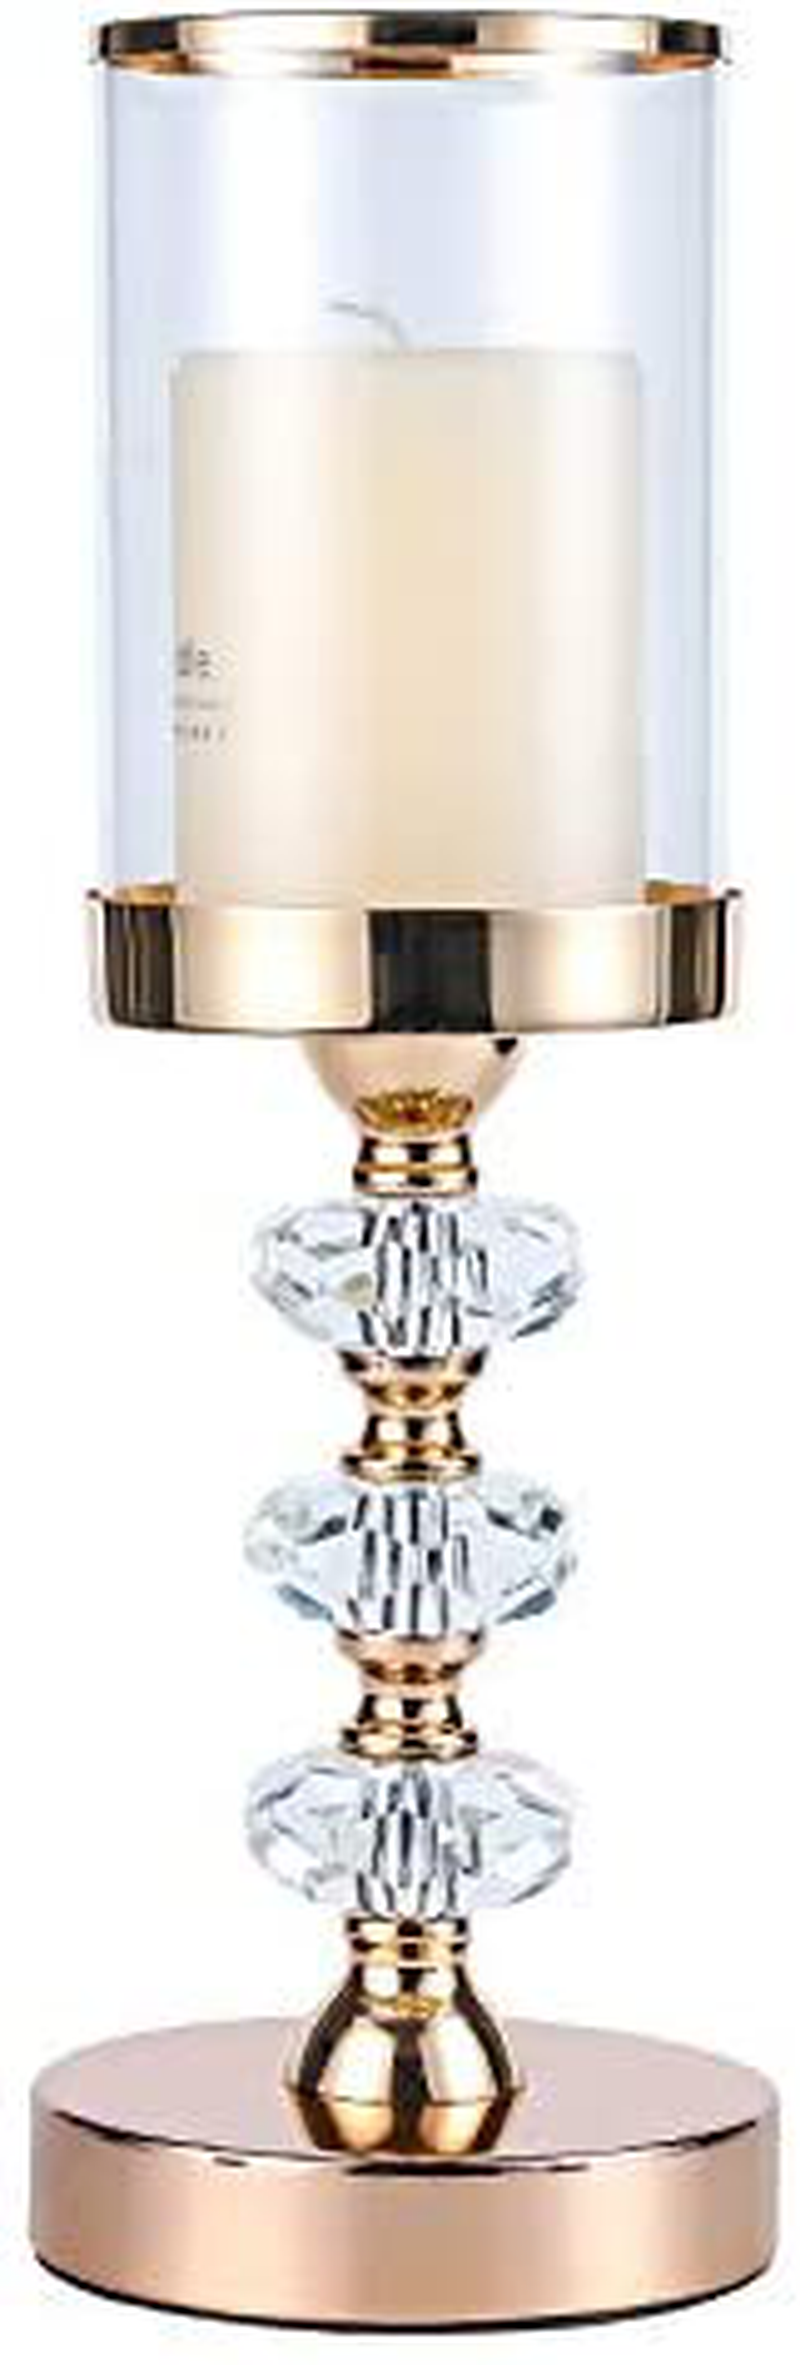 Pillar Candle Holder with Glass Lid,Candlesticks Holder for Pillar Candle, Candle Holder with Crystal Balls for Coffee Dining Table, Wedding, Christmas, Halloween, Home Decoration ZXC028M